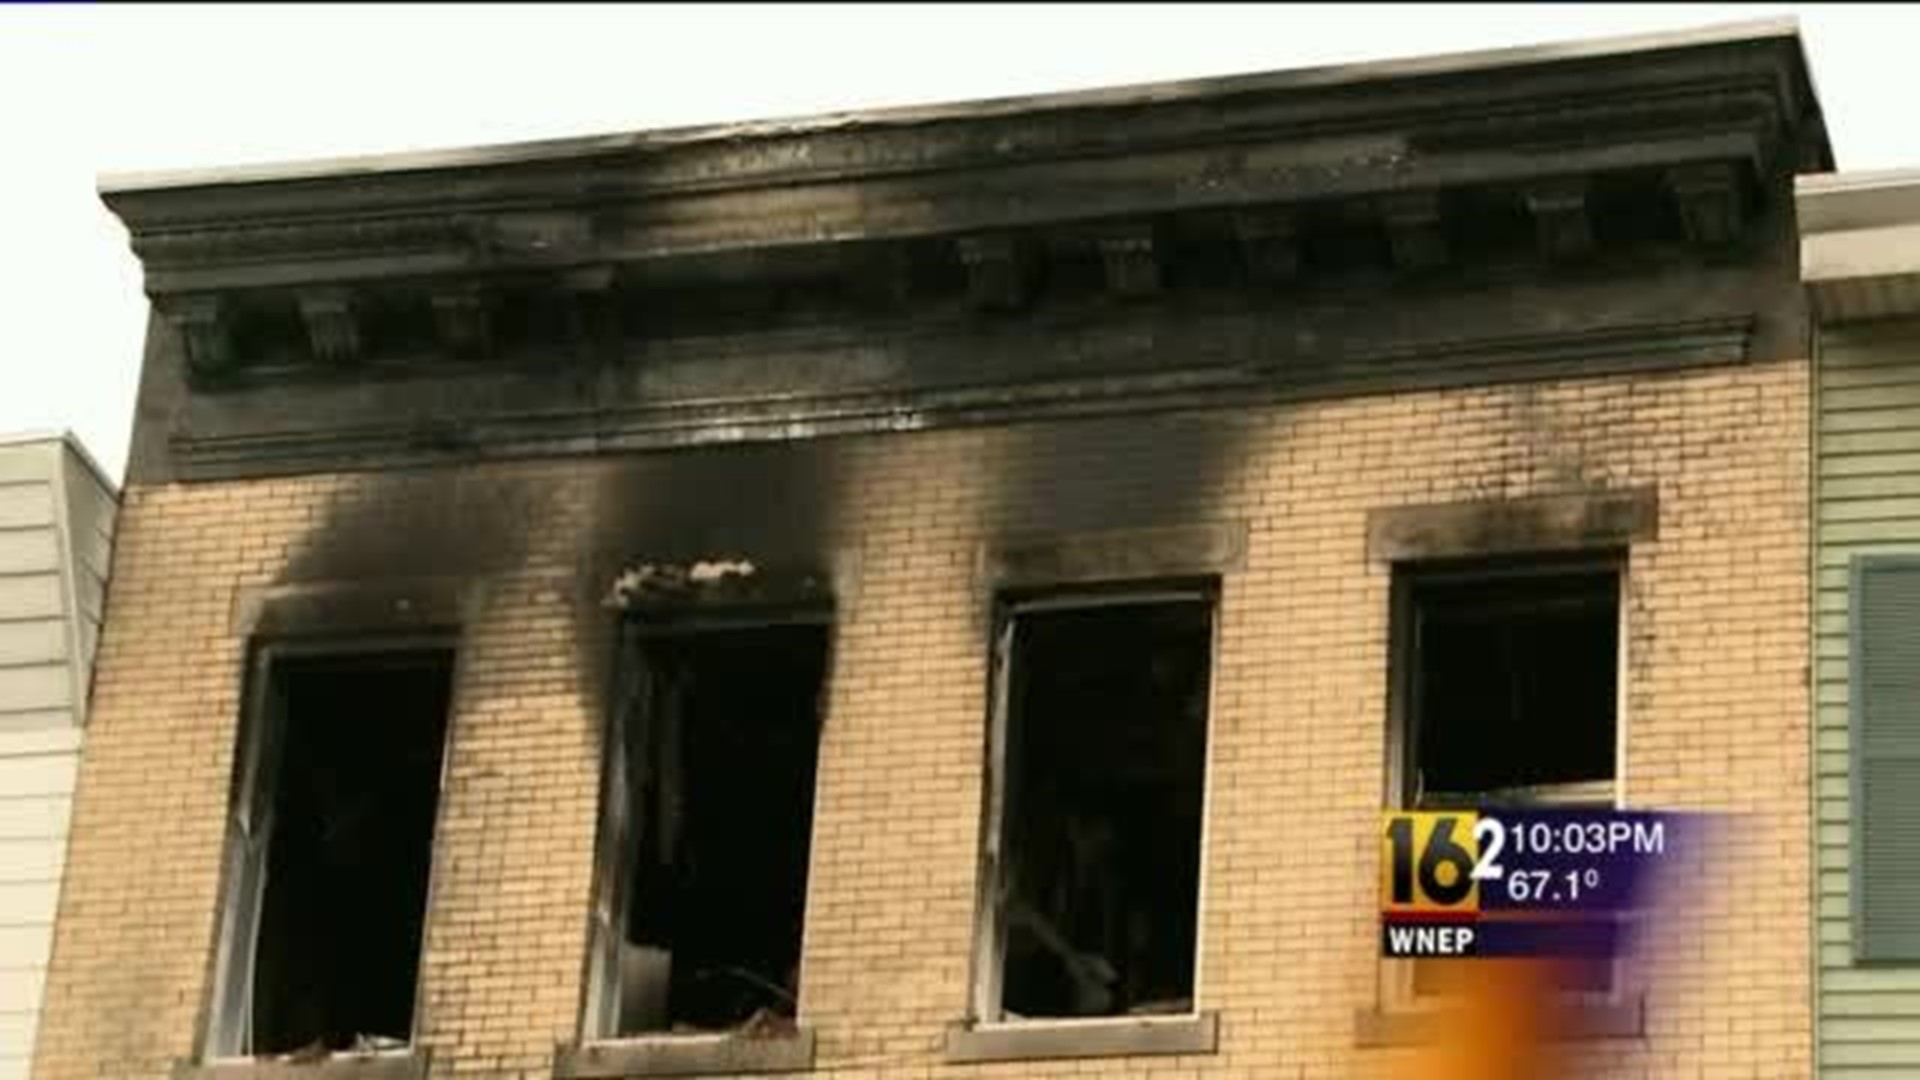 Mahanoy City Officials: Firewall Saved Others